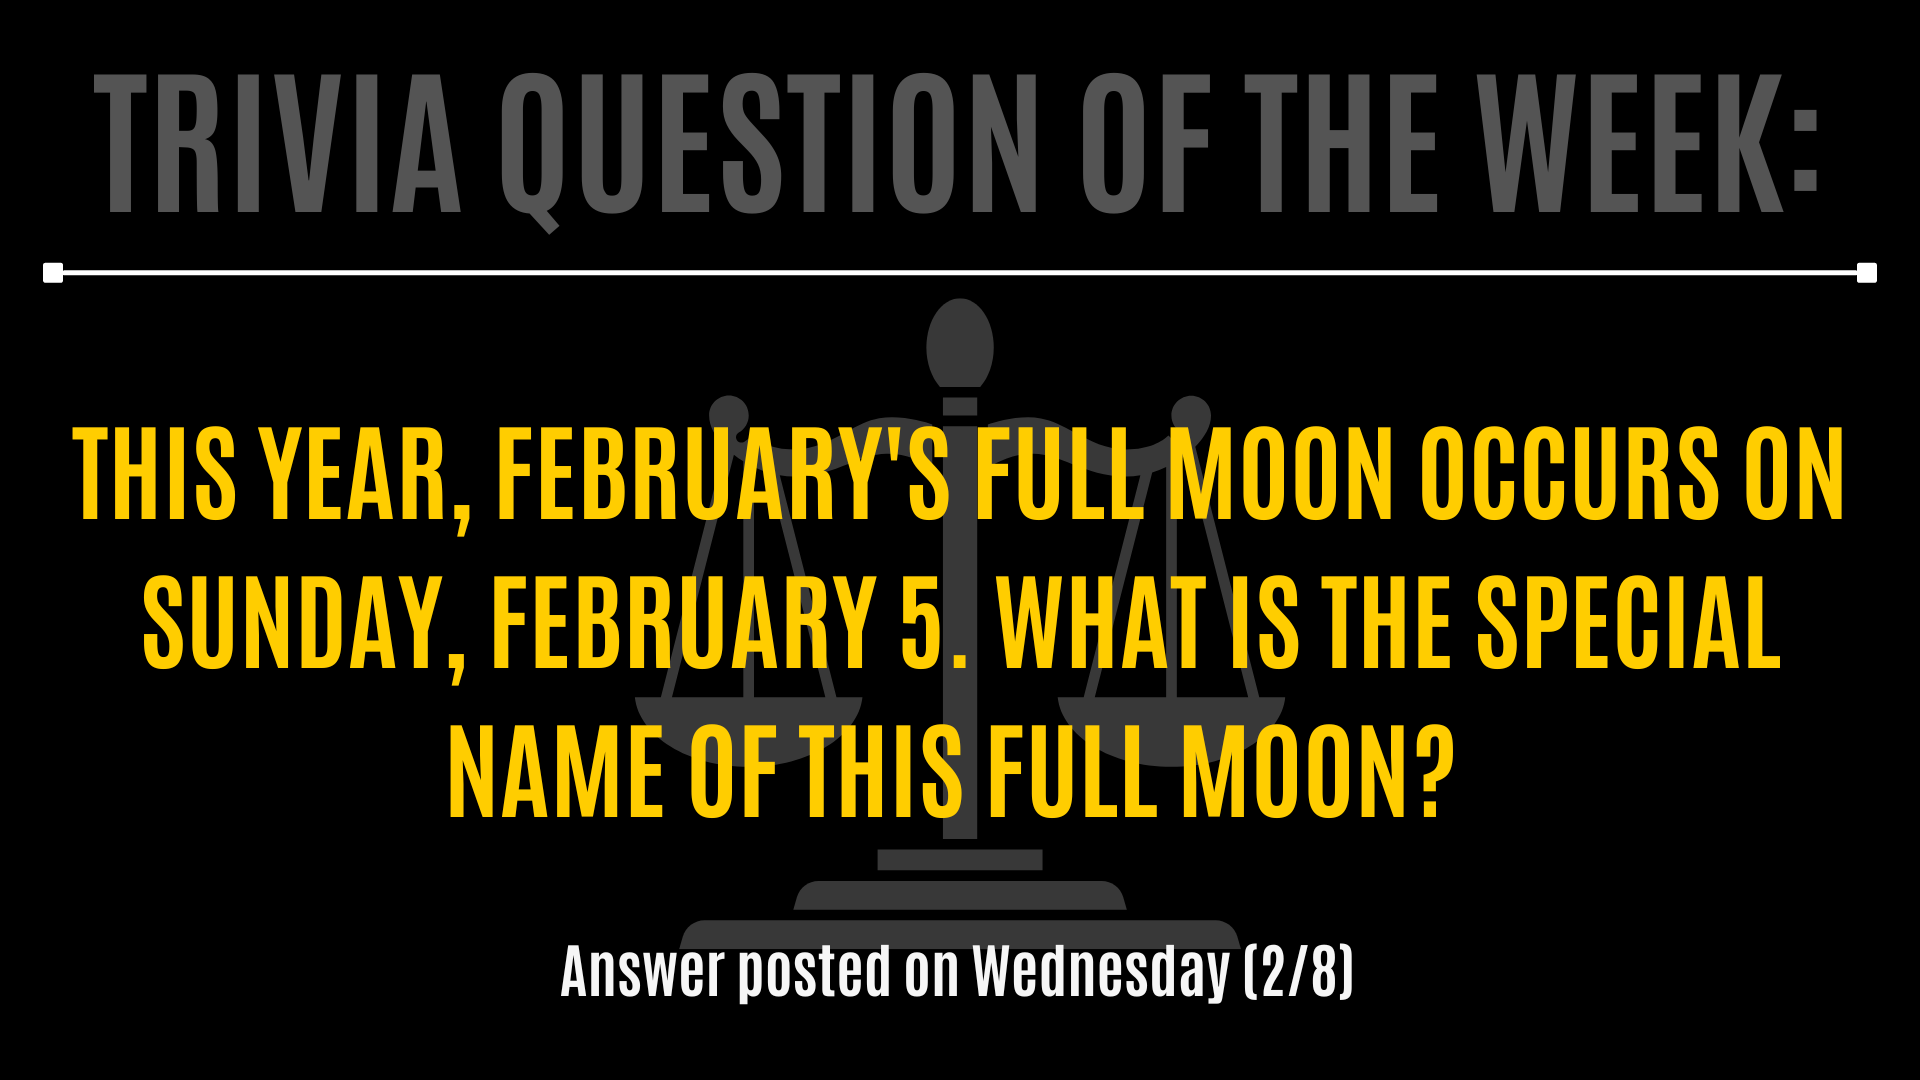 Trivia question of the week: This year, February's full moon occurs on Sunday, February 5. What is the special name of this full moon?